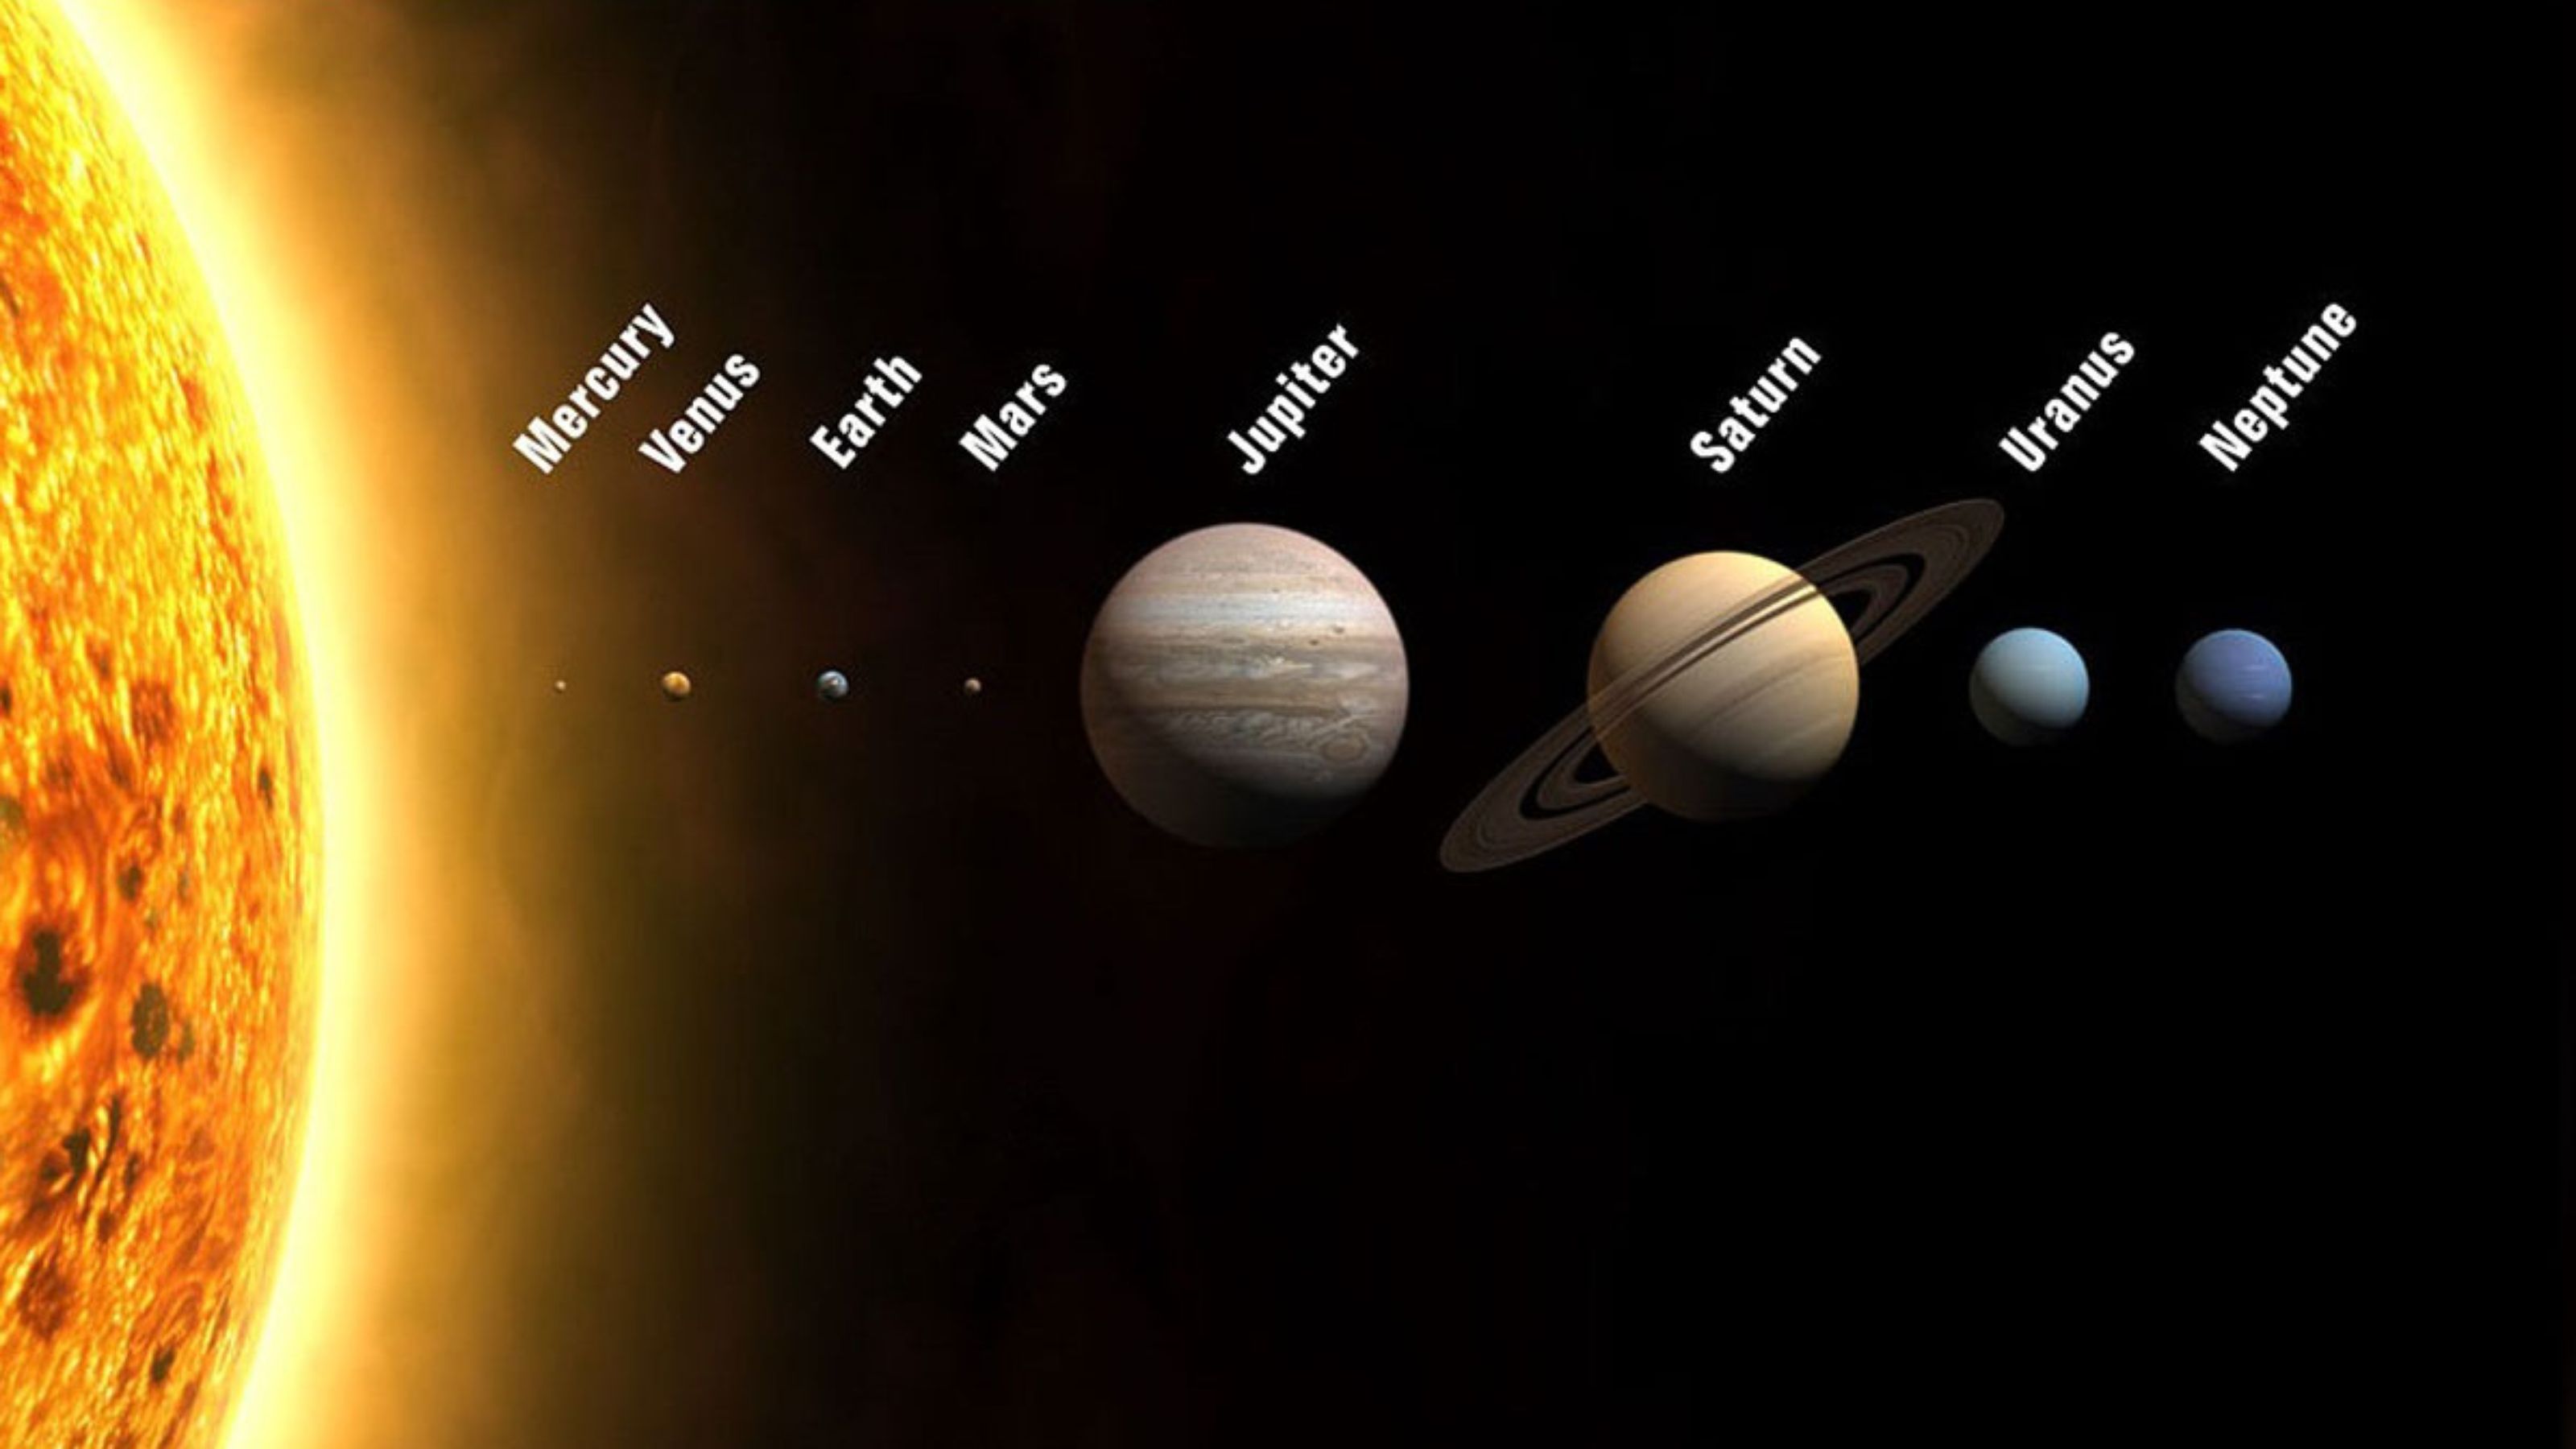 planets astronomical watch